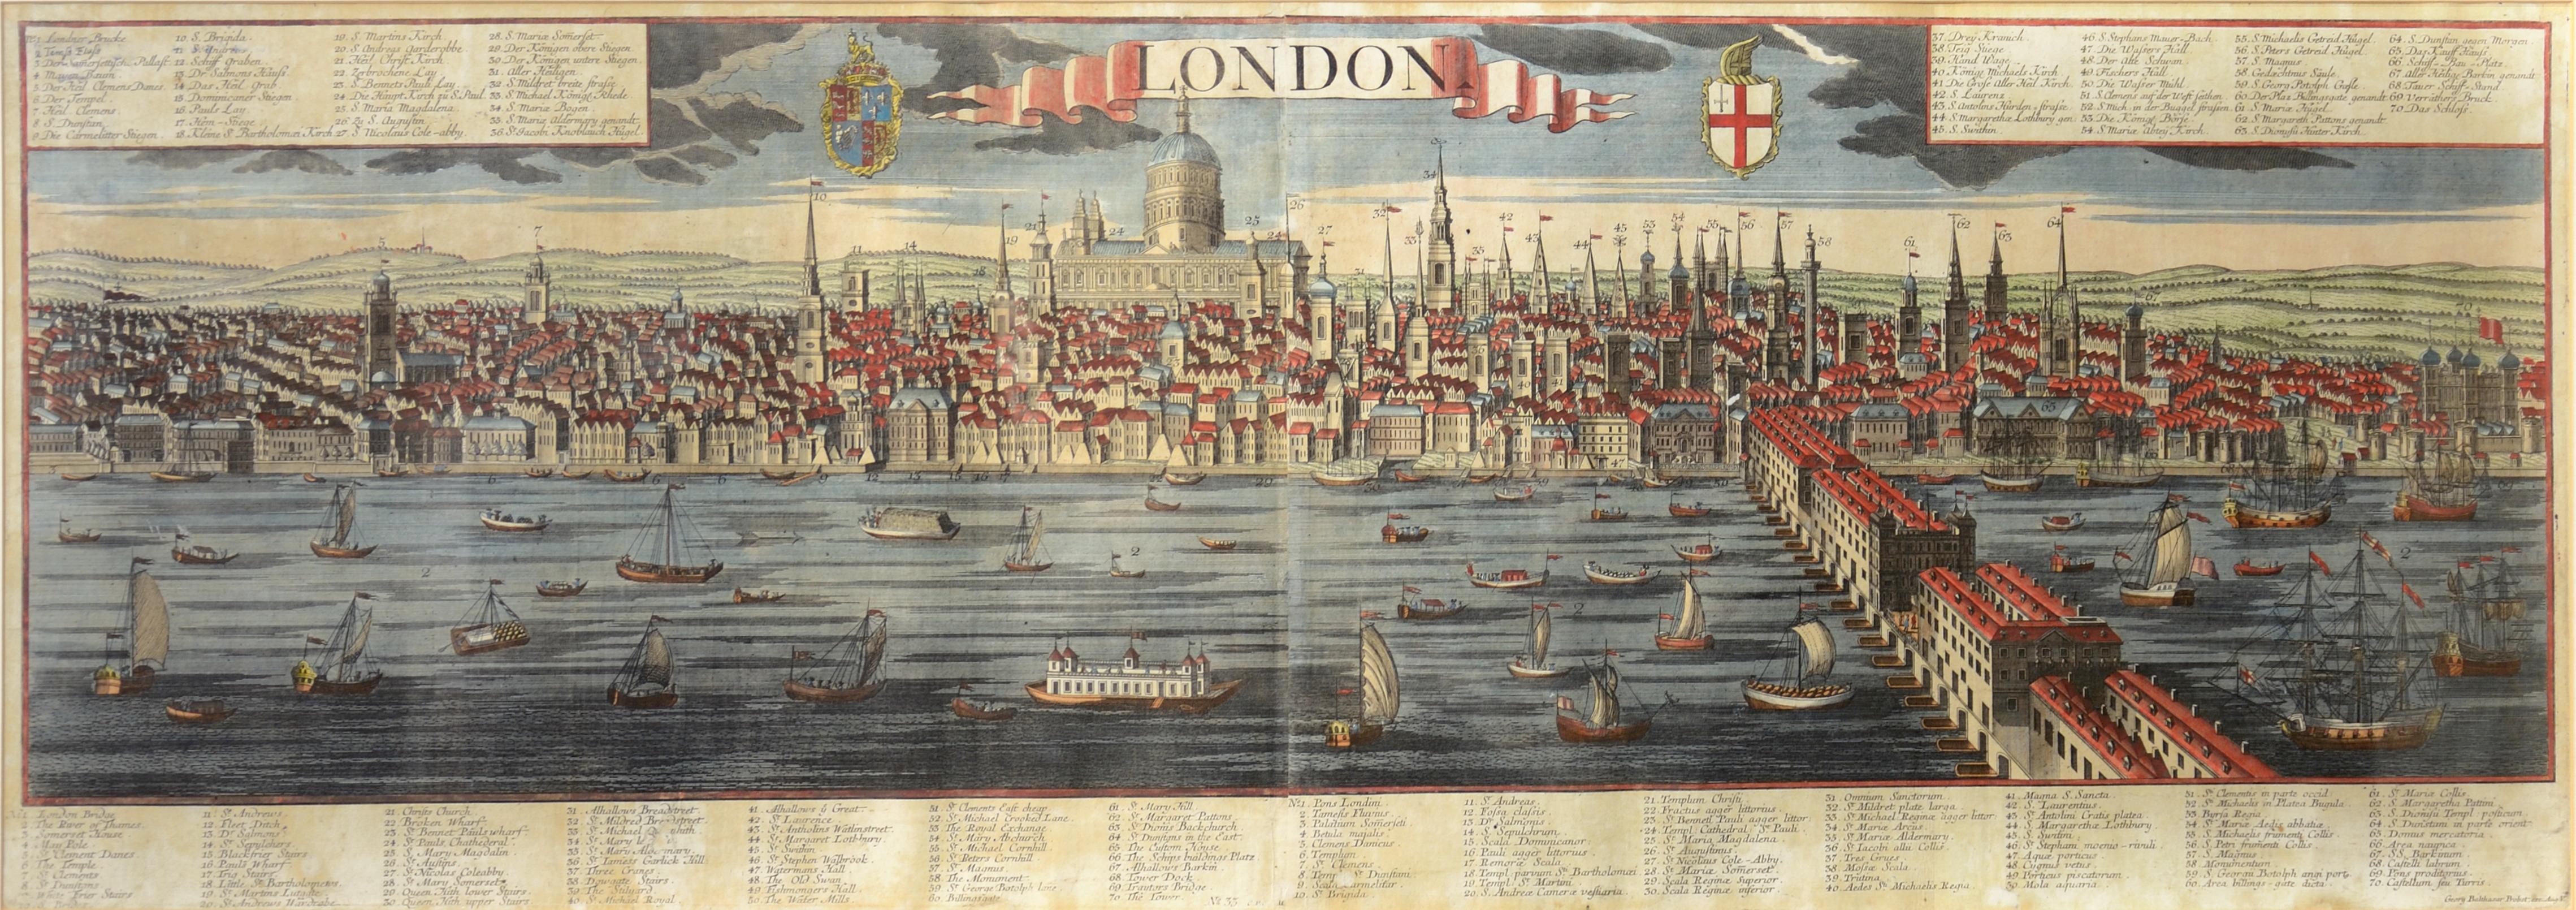 WERNER. A Panoramic View of London - Print by Friedrich Bernhard Werner